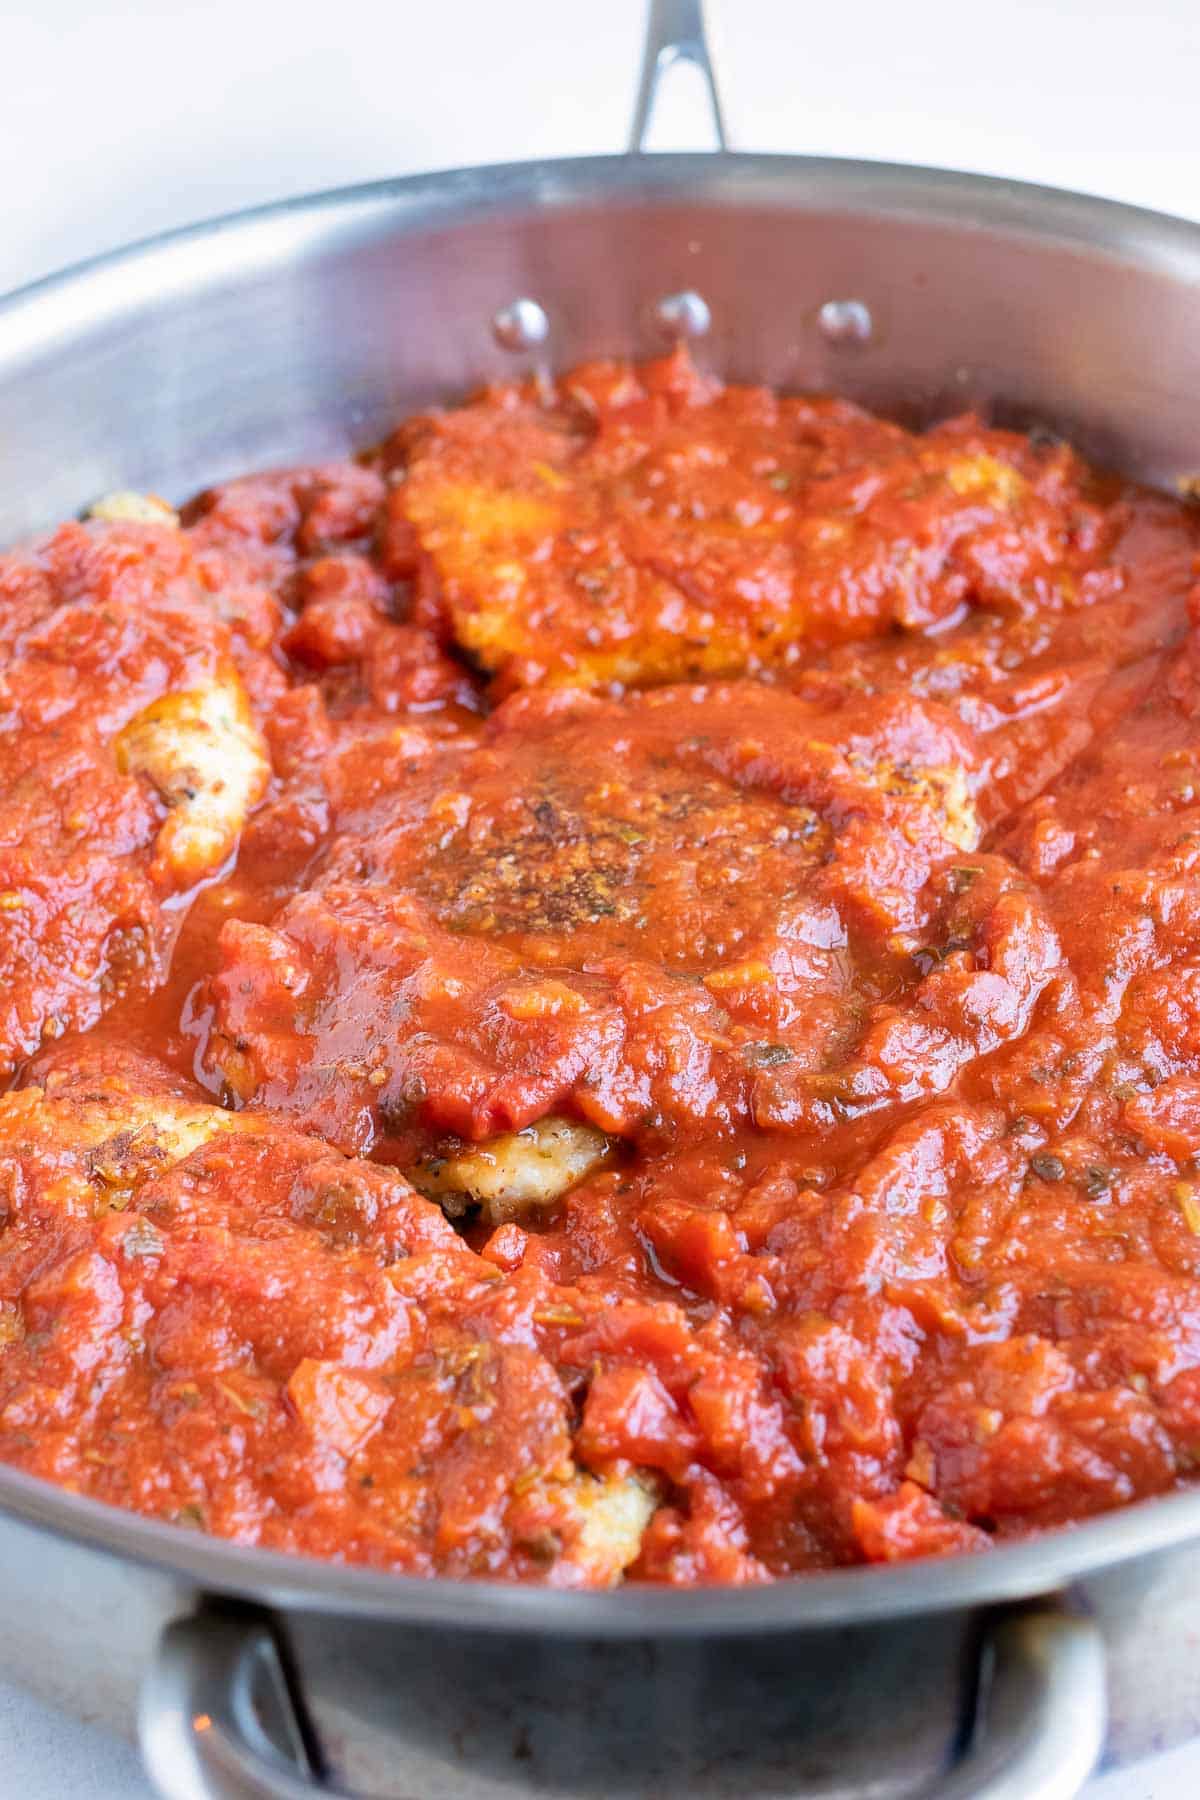 Add marinara sauce to the skillet for this Italian dinner.